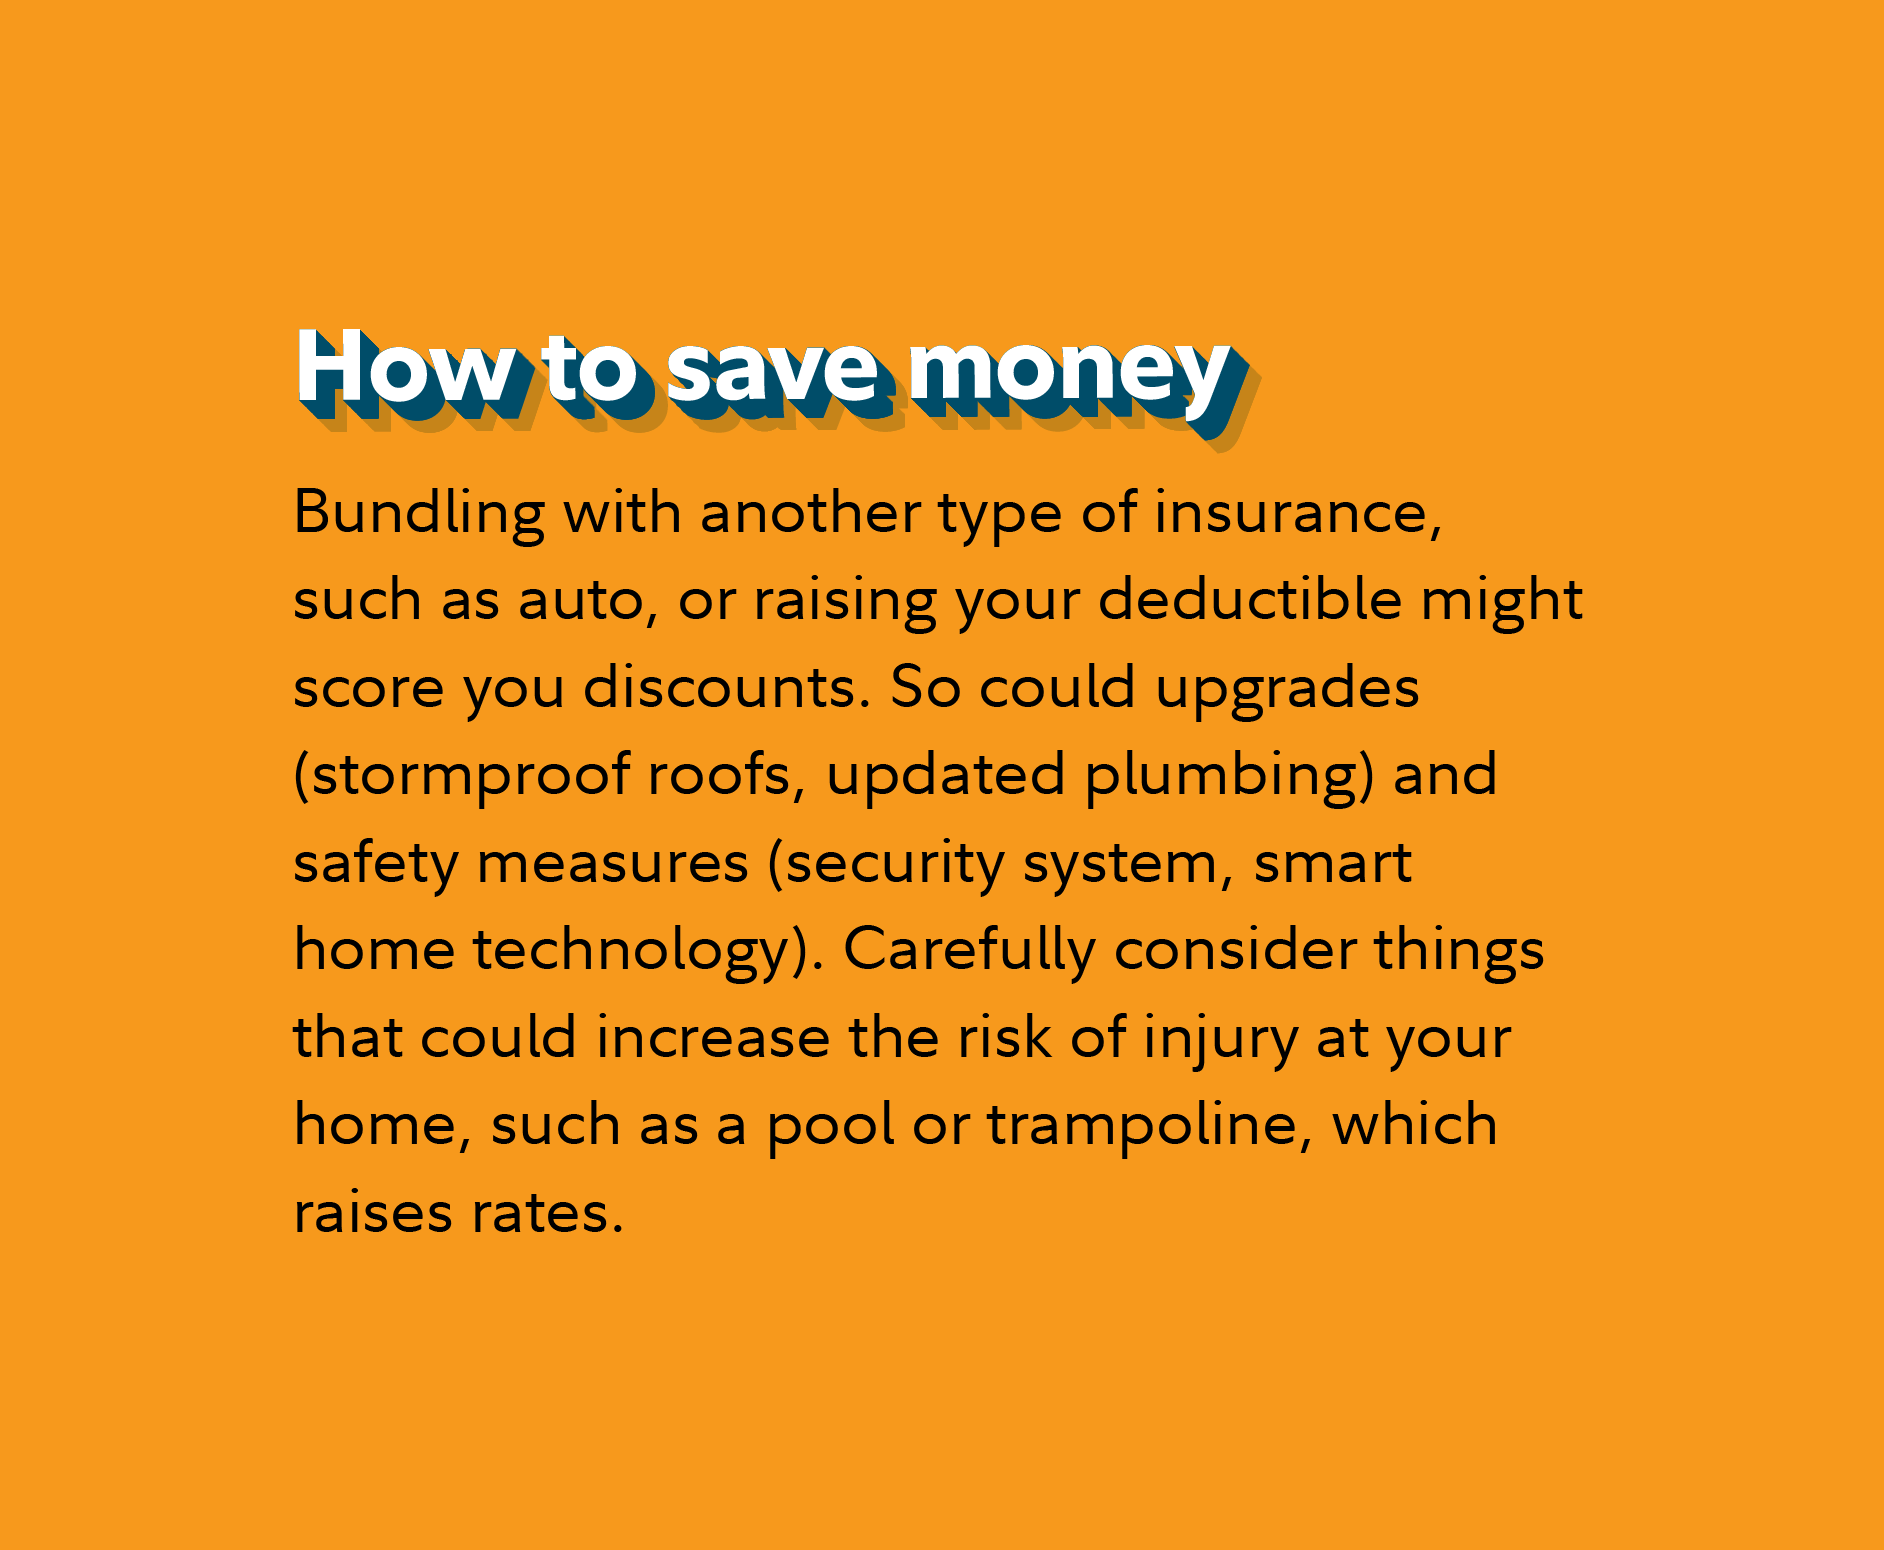 How to save money Bundling with another type of insurance, such as auto, or raising your deductible might score you discounts. So could upgrades (stormproof roofs, updated plumbing) and safety measures (security system, smart home technology). Carefully consider things that could increase the risk of injury at your home, such as a pool or trampoline, which raises rates. 